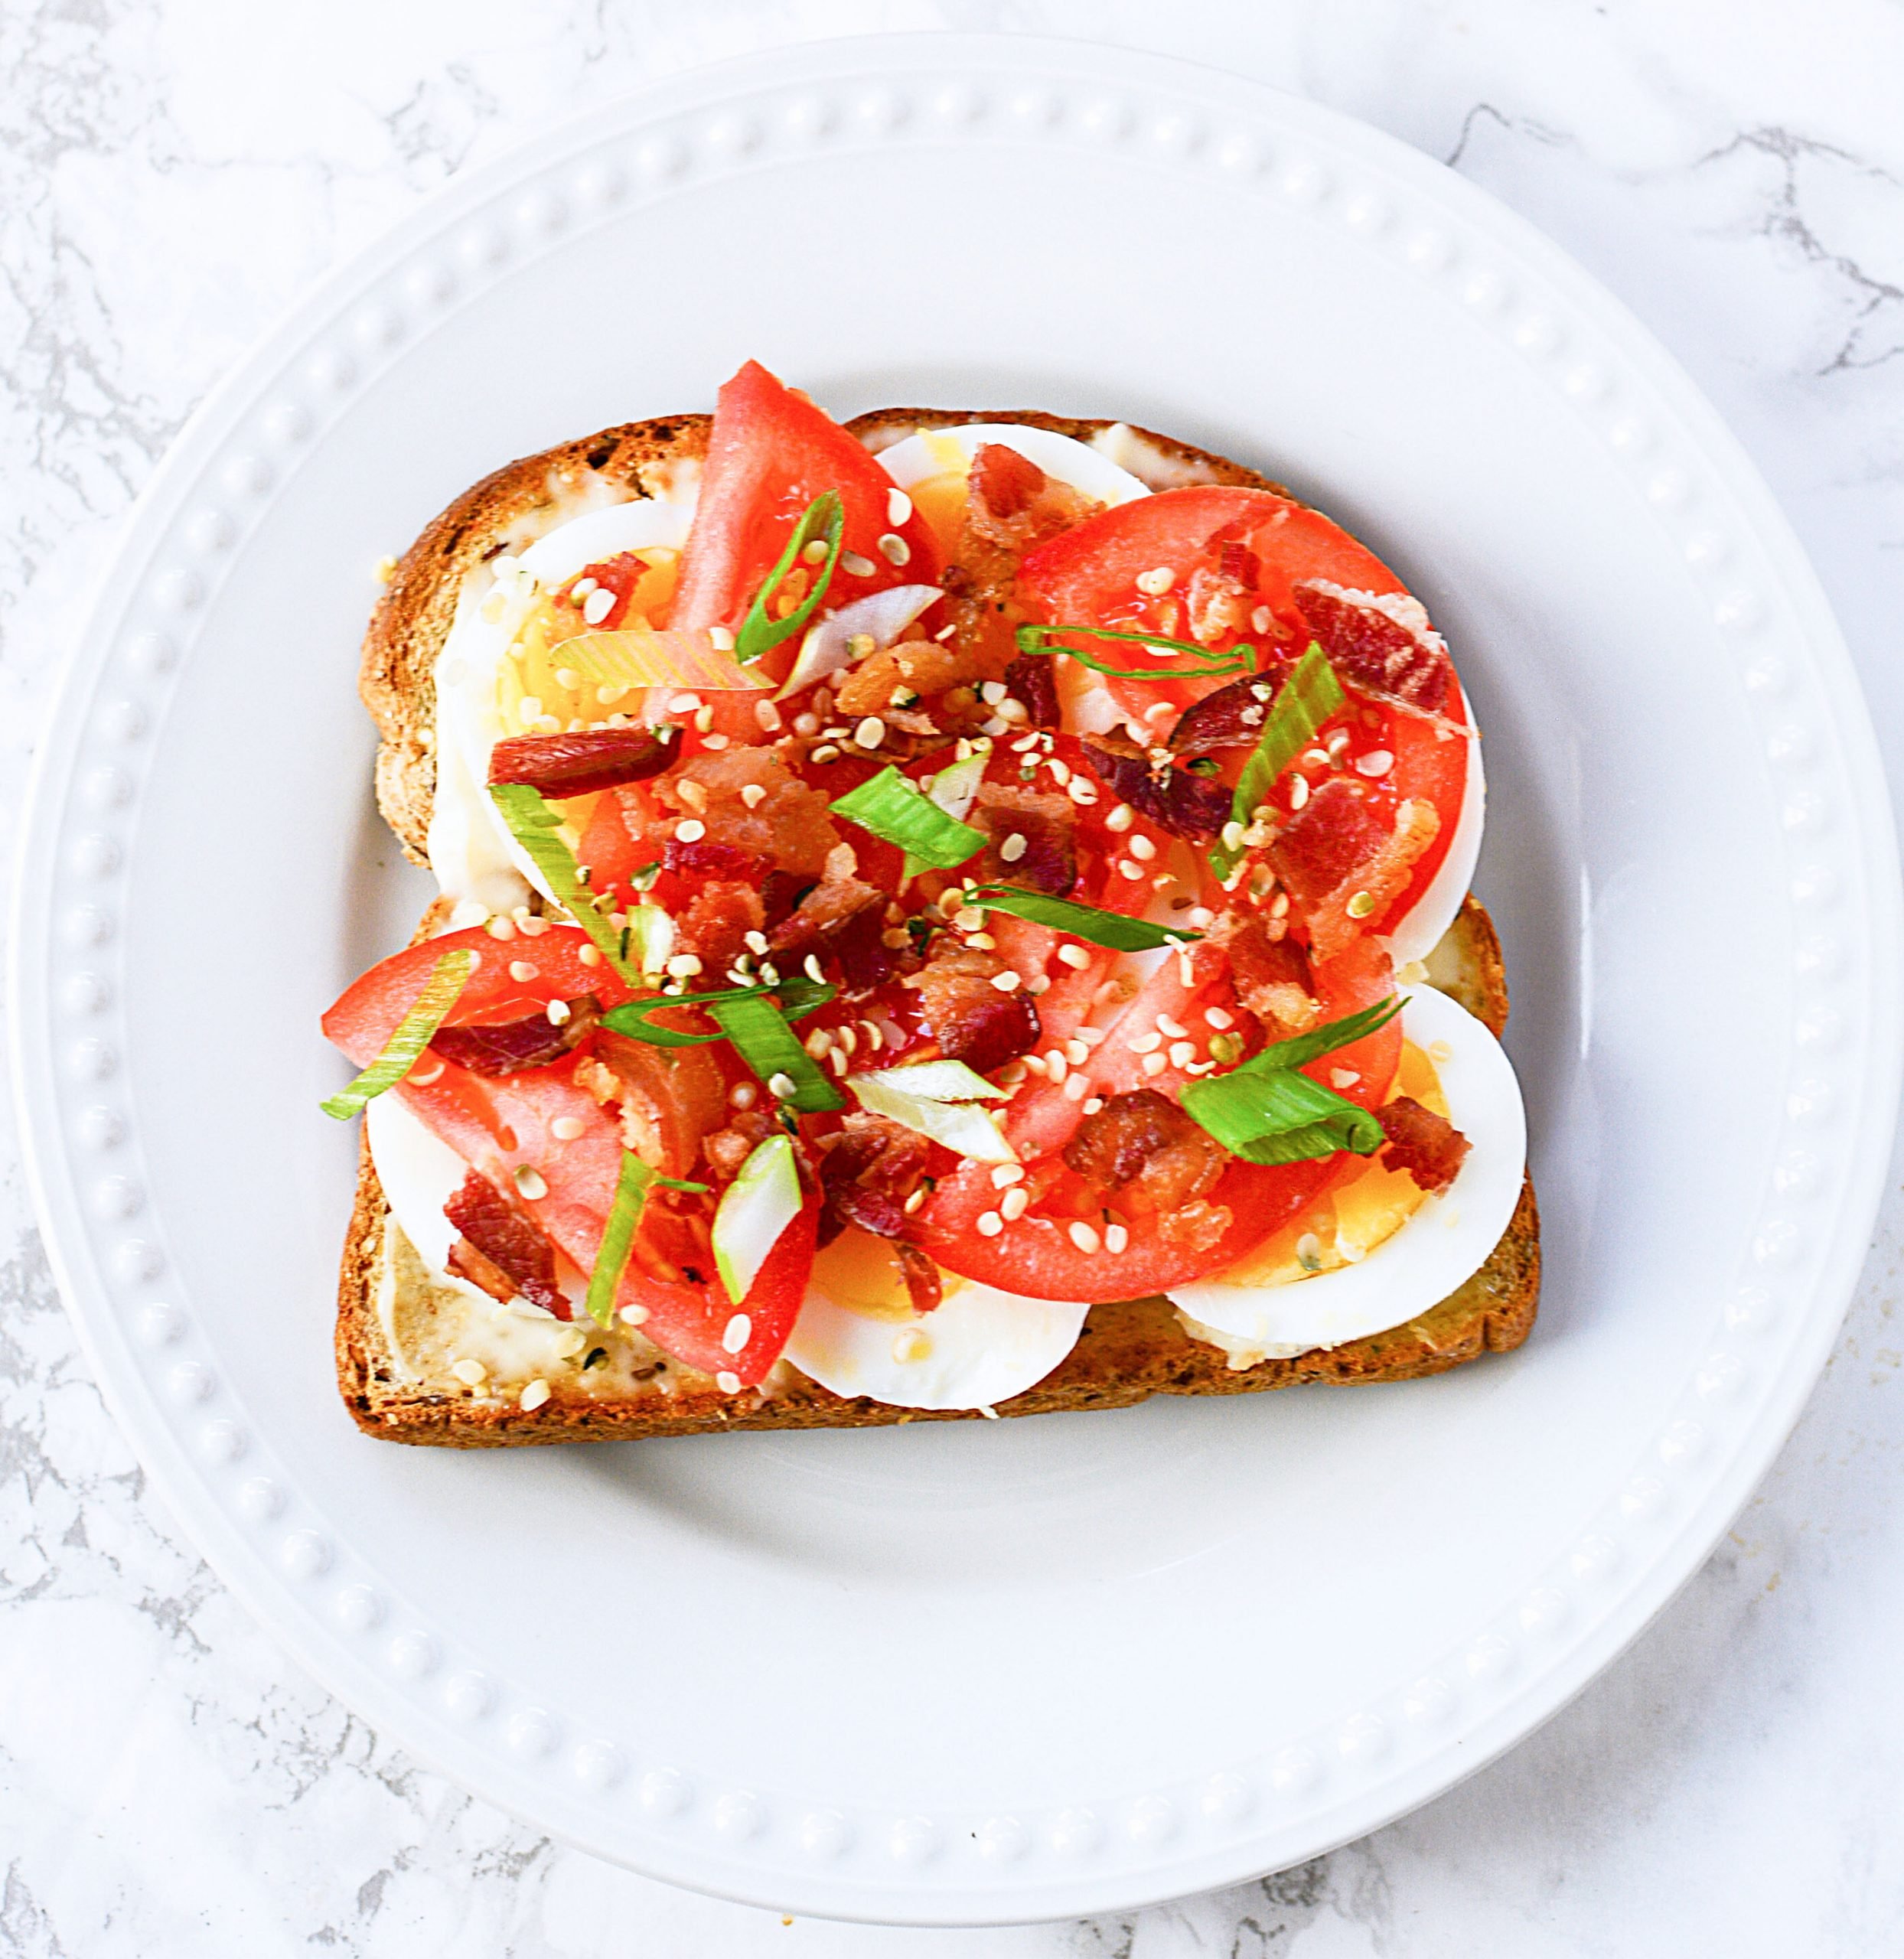 Toast with mayo, hardboiled egg, sliced tomato and bacon bits over the top.